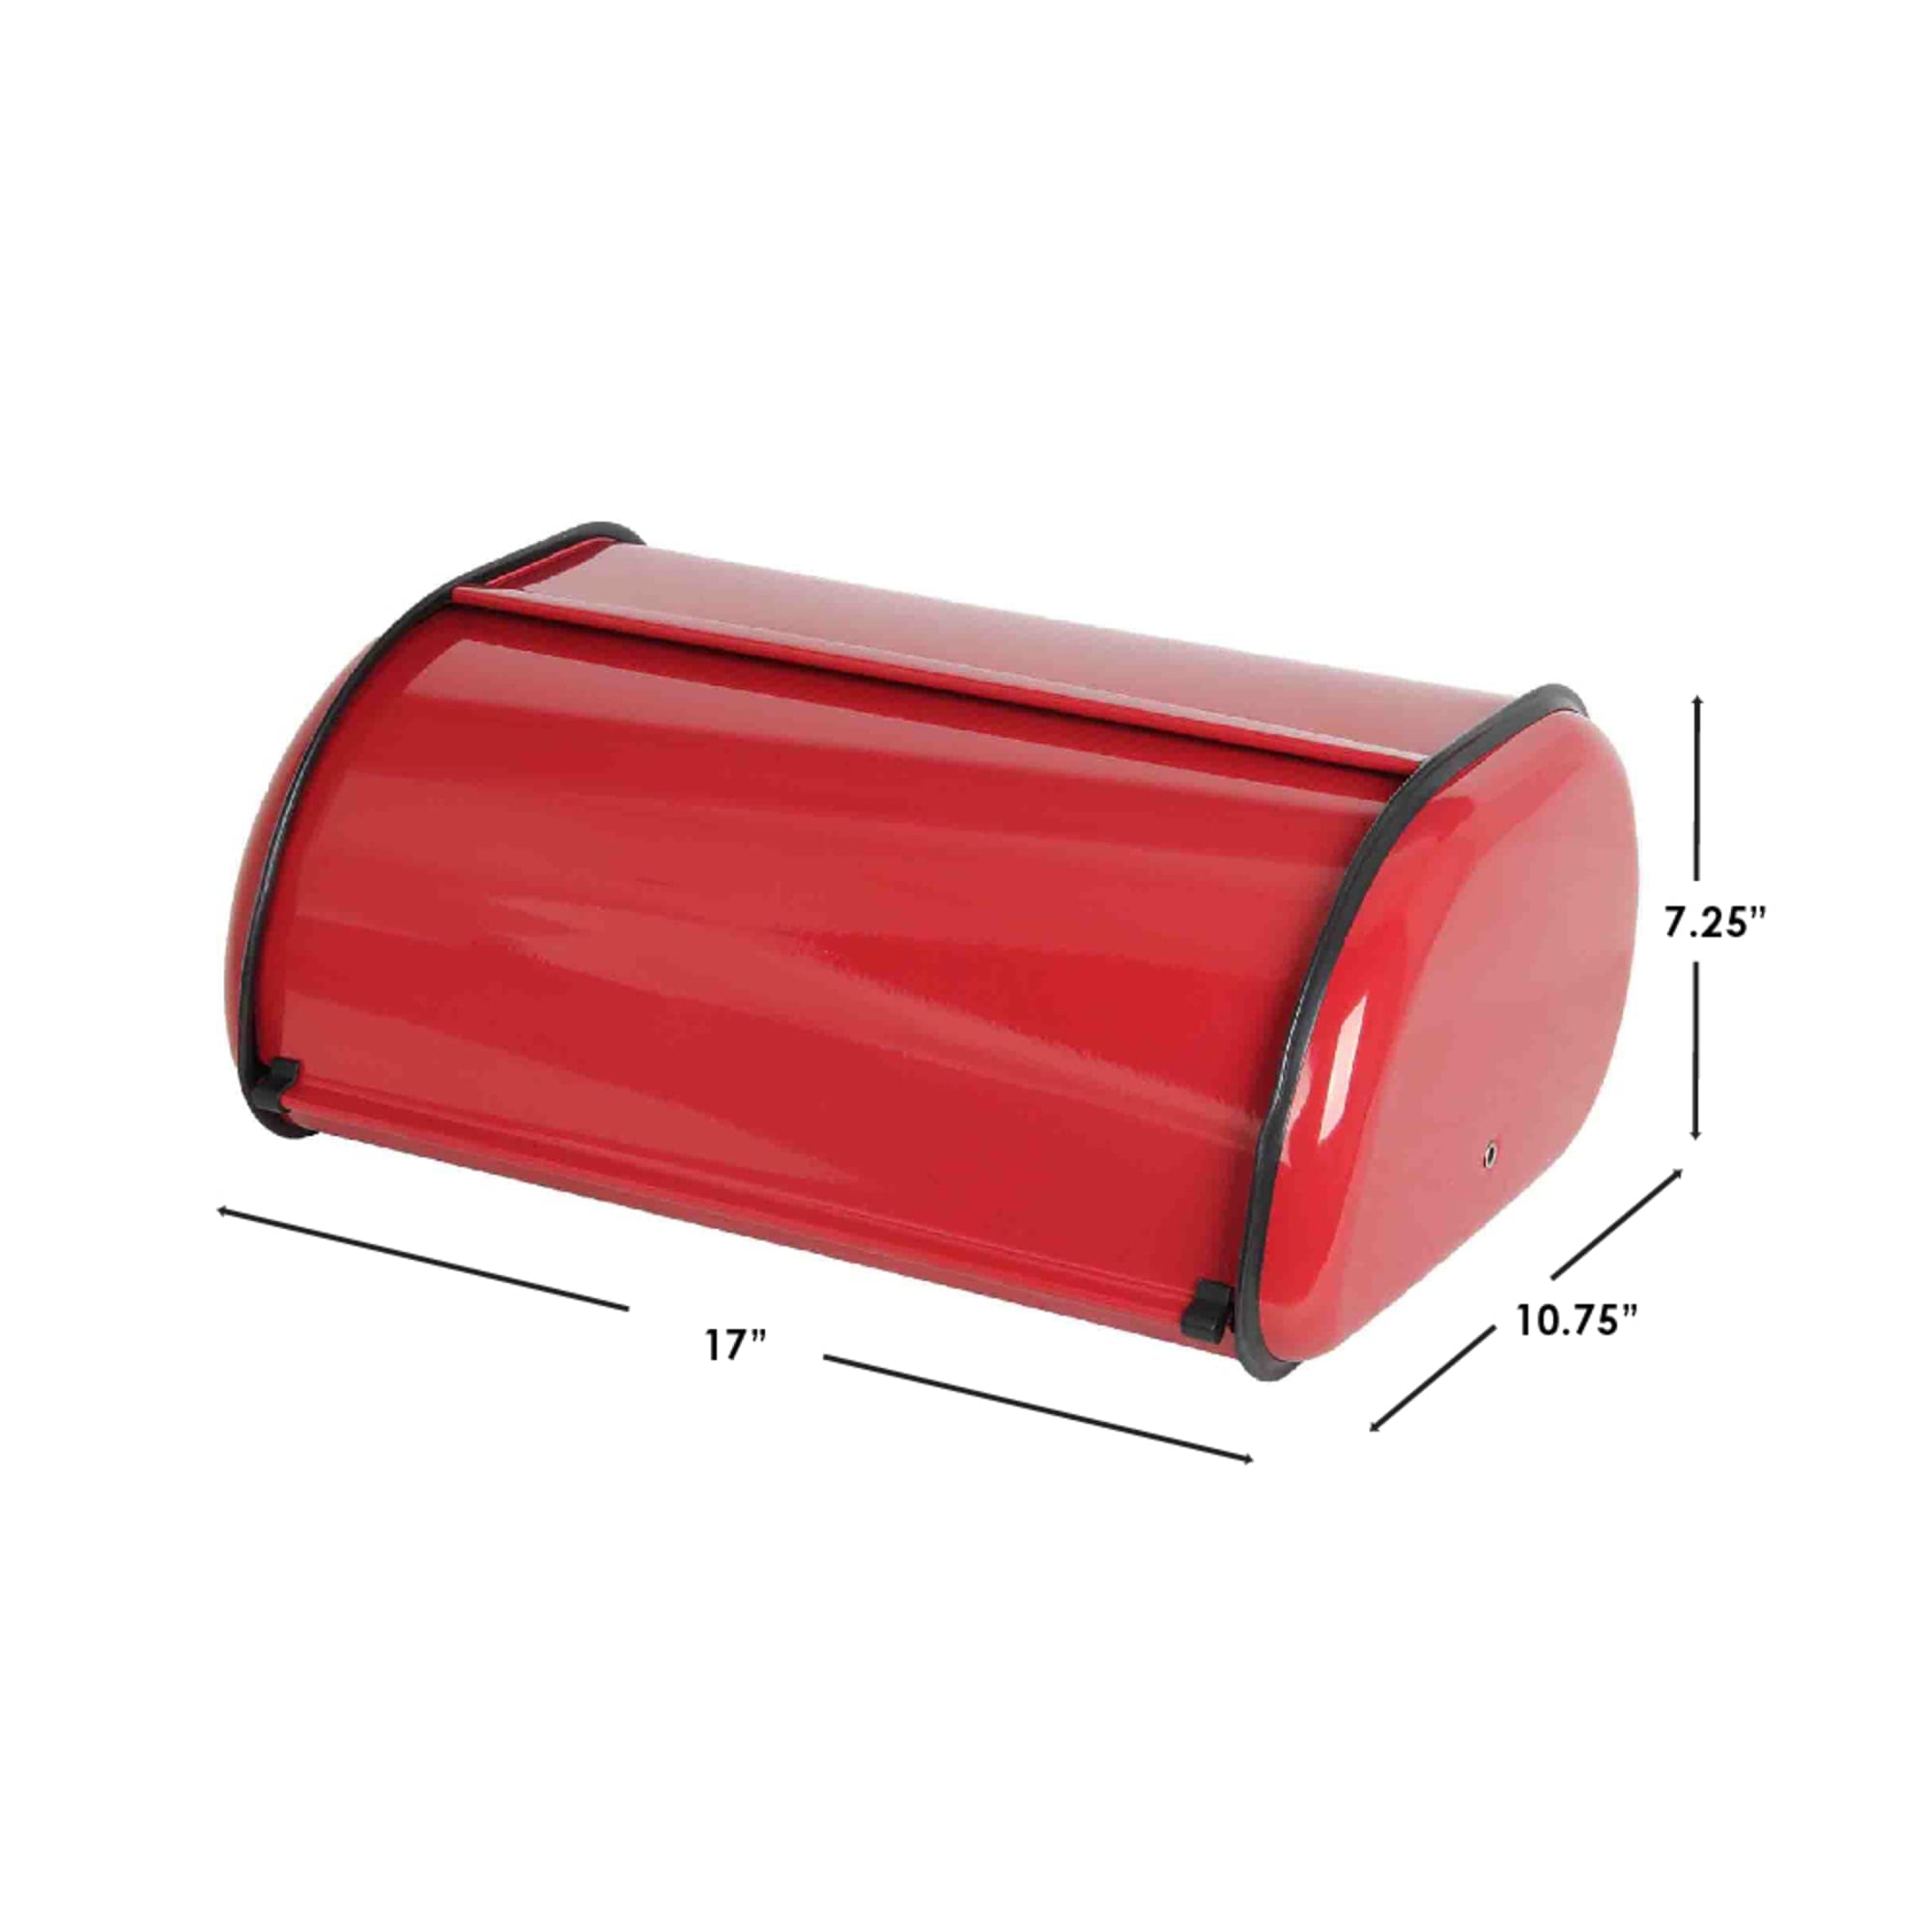 Red Steel Bread Box with Roll Top Lid, Ventilation Moisture Control, Durable Kitchen Storage for Fresh Bread $20.00 EACH, CASE PACK OF 6